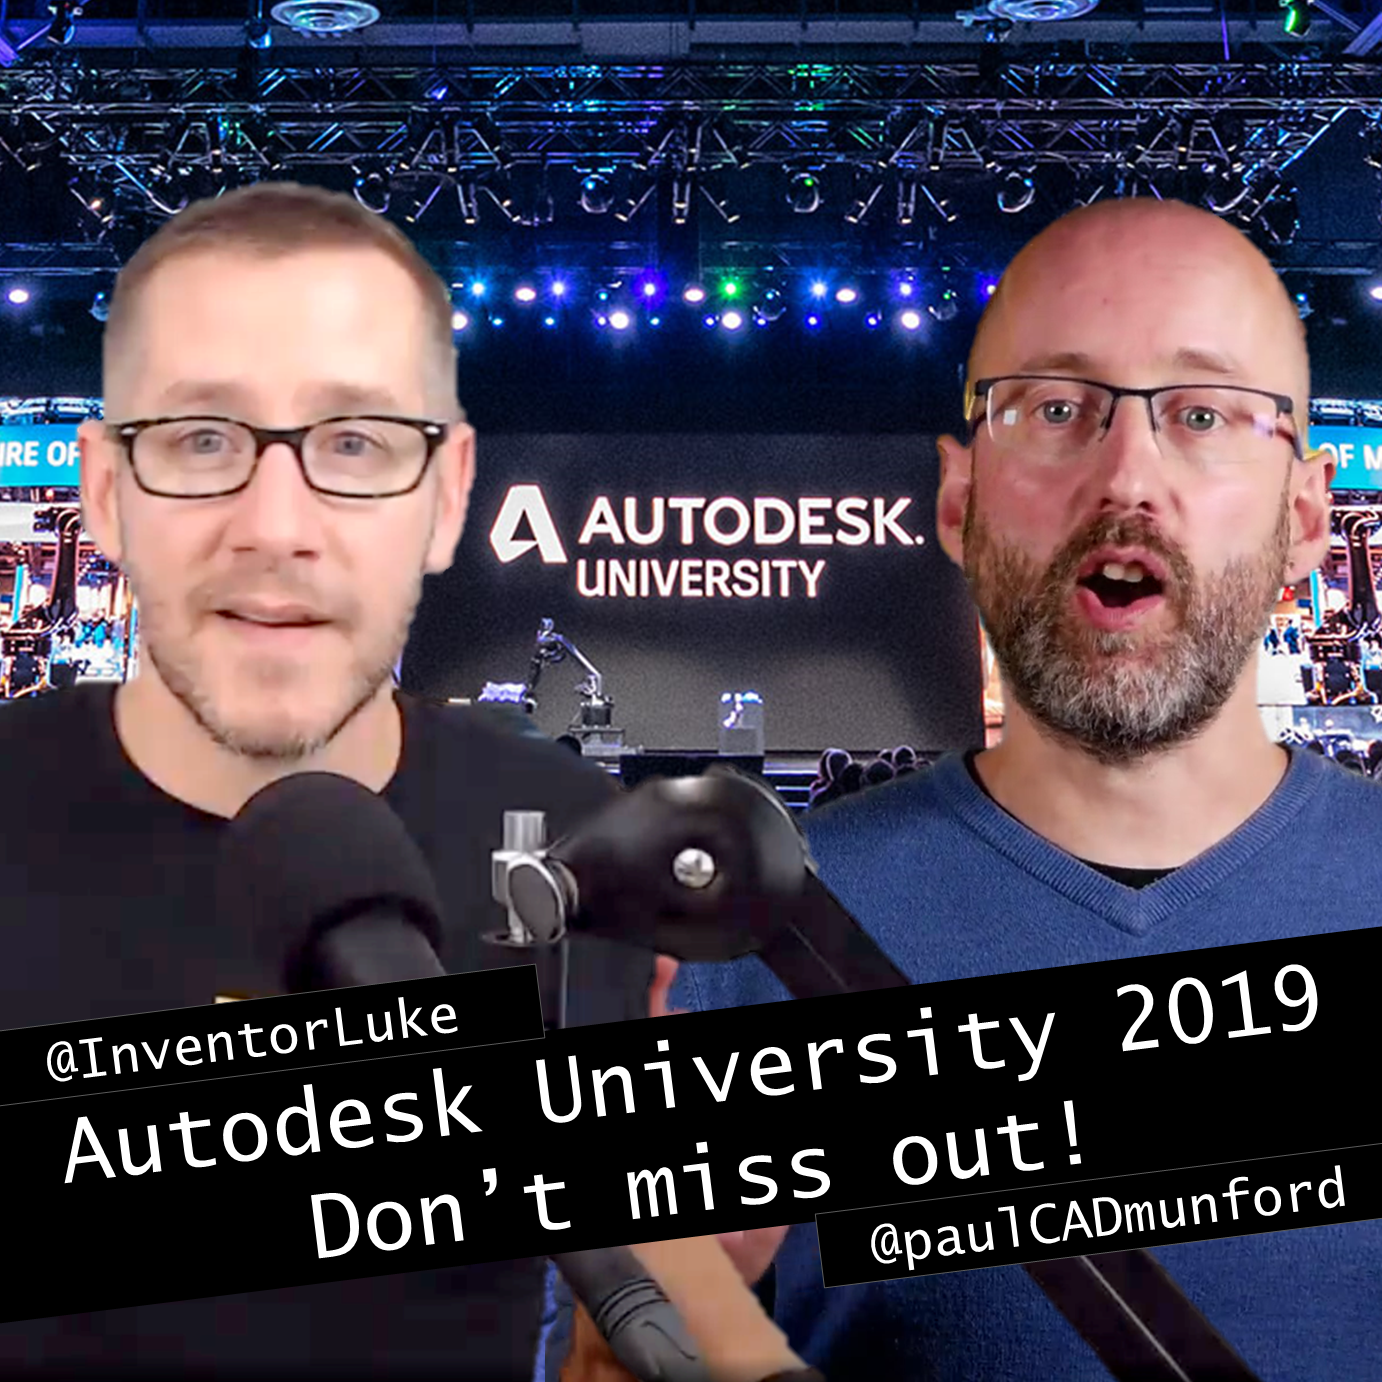 Luke Mihelcic @InventorLuke and Paul Munford @paulCADmunford recommend hier top Inventor and Vault classes for Autodesk University 2019.